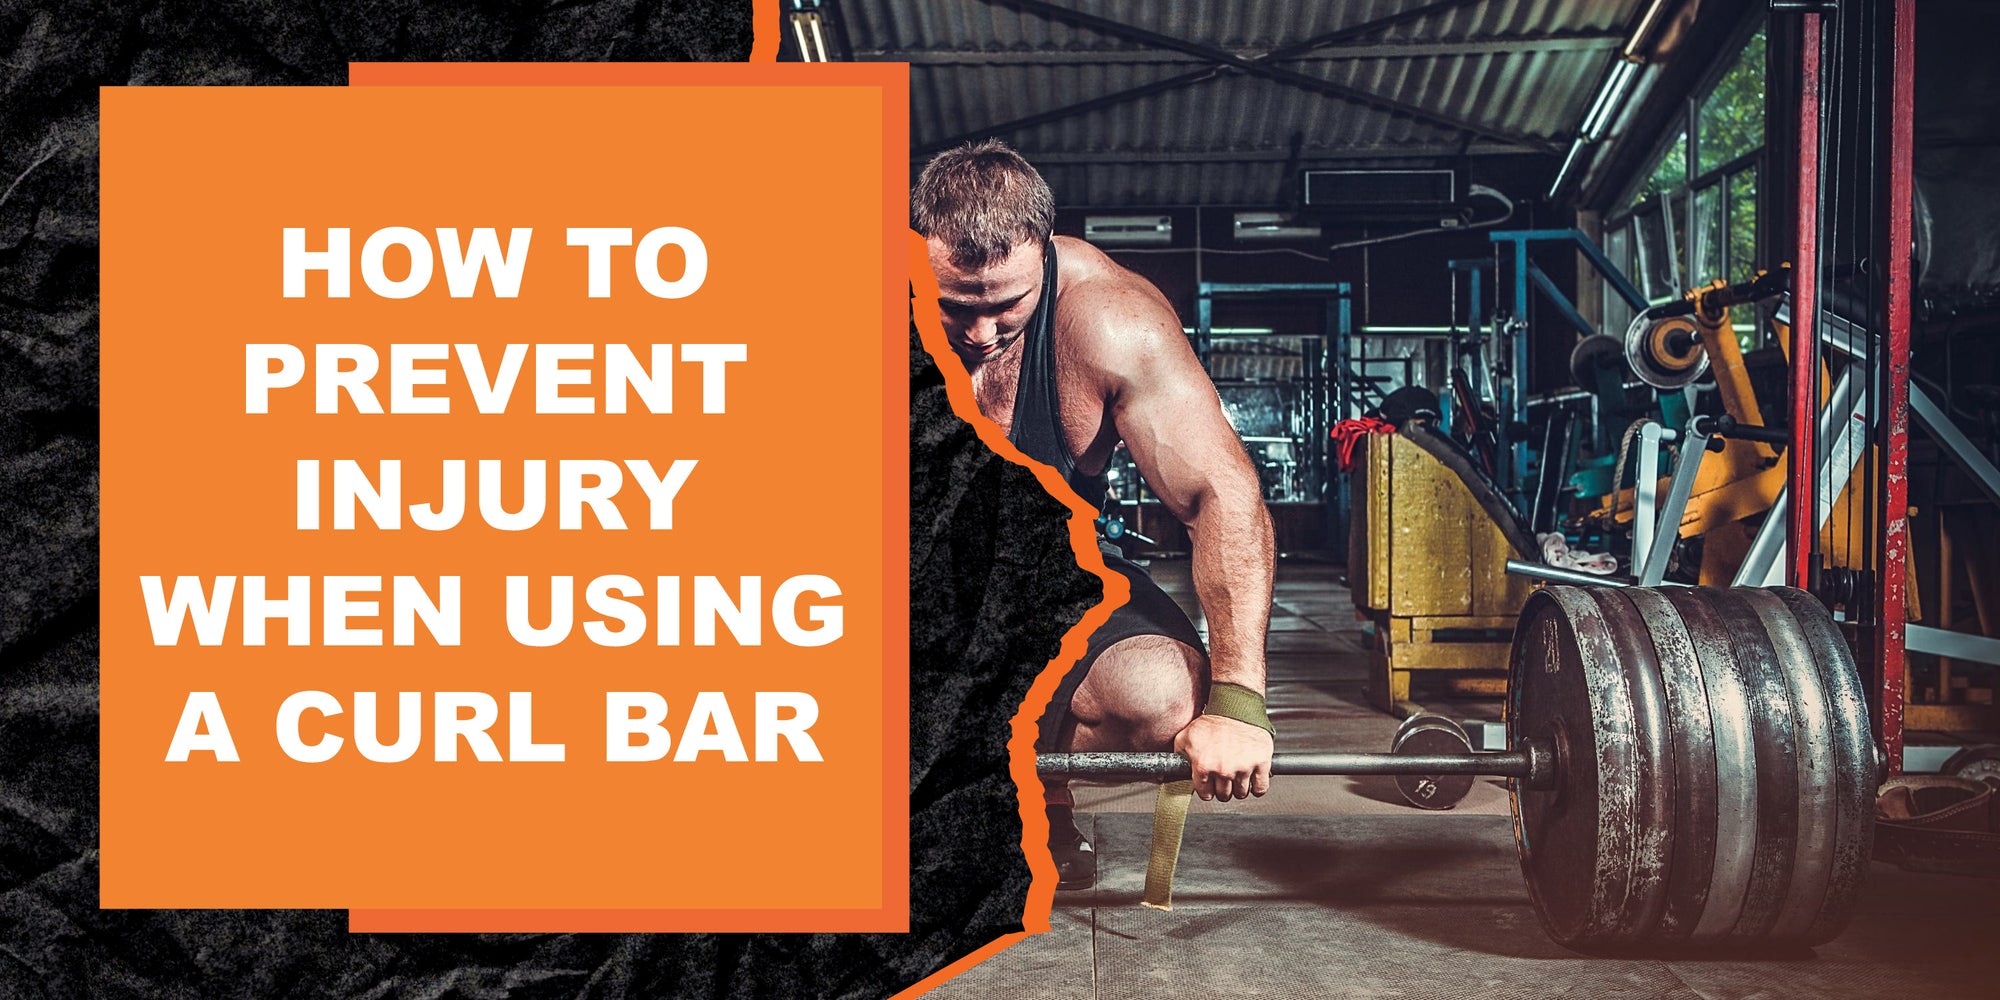 How to Prevent Injury When Using a Curl Bar